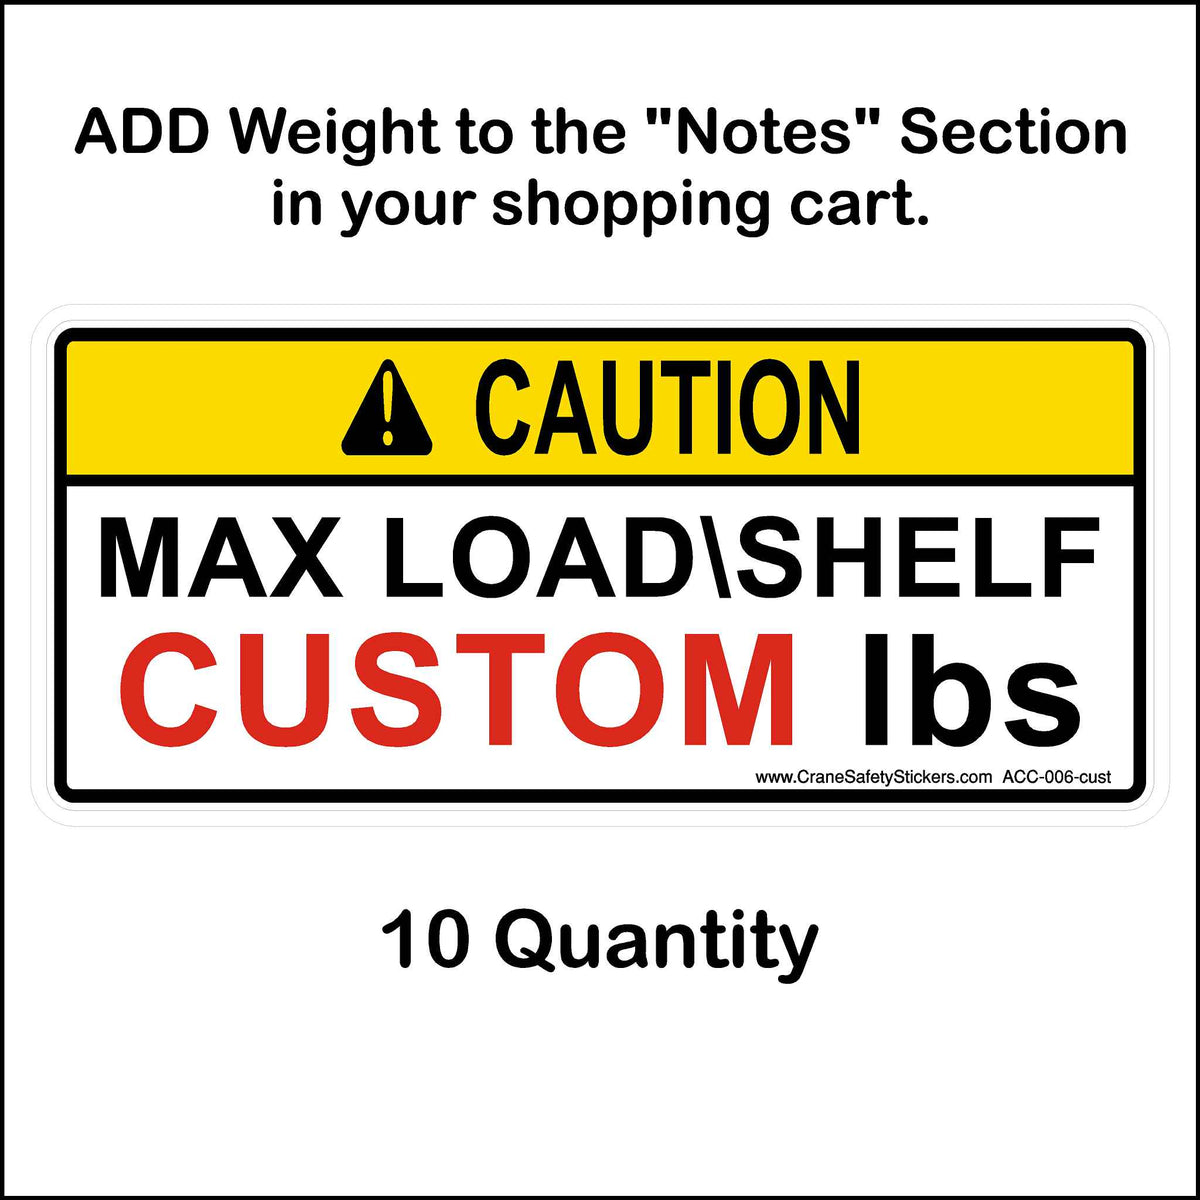 Custom Small Pallet Racking Sticker Printed with Caution Max Load Shelf. 10 Quantity.